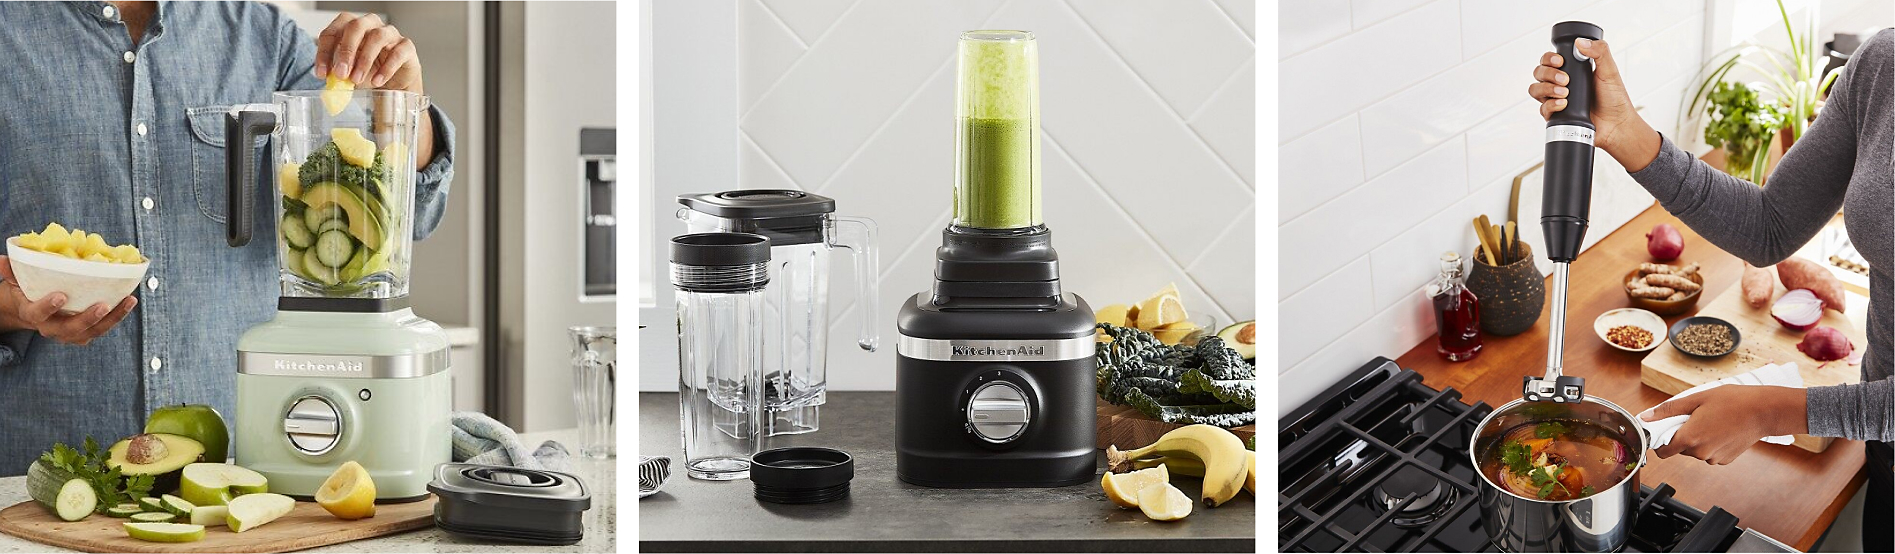 Three types of blenders being used: A countertop blender, personal blender and immersion blender